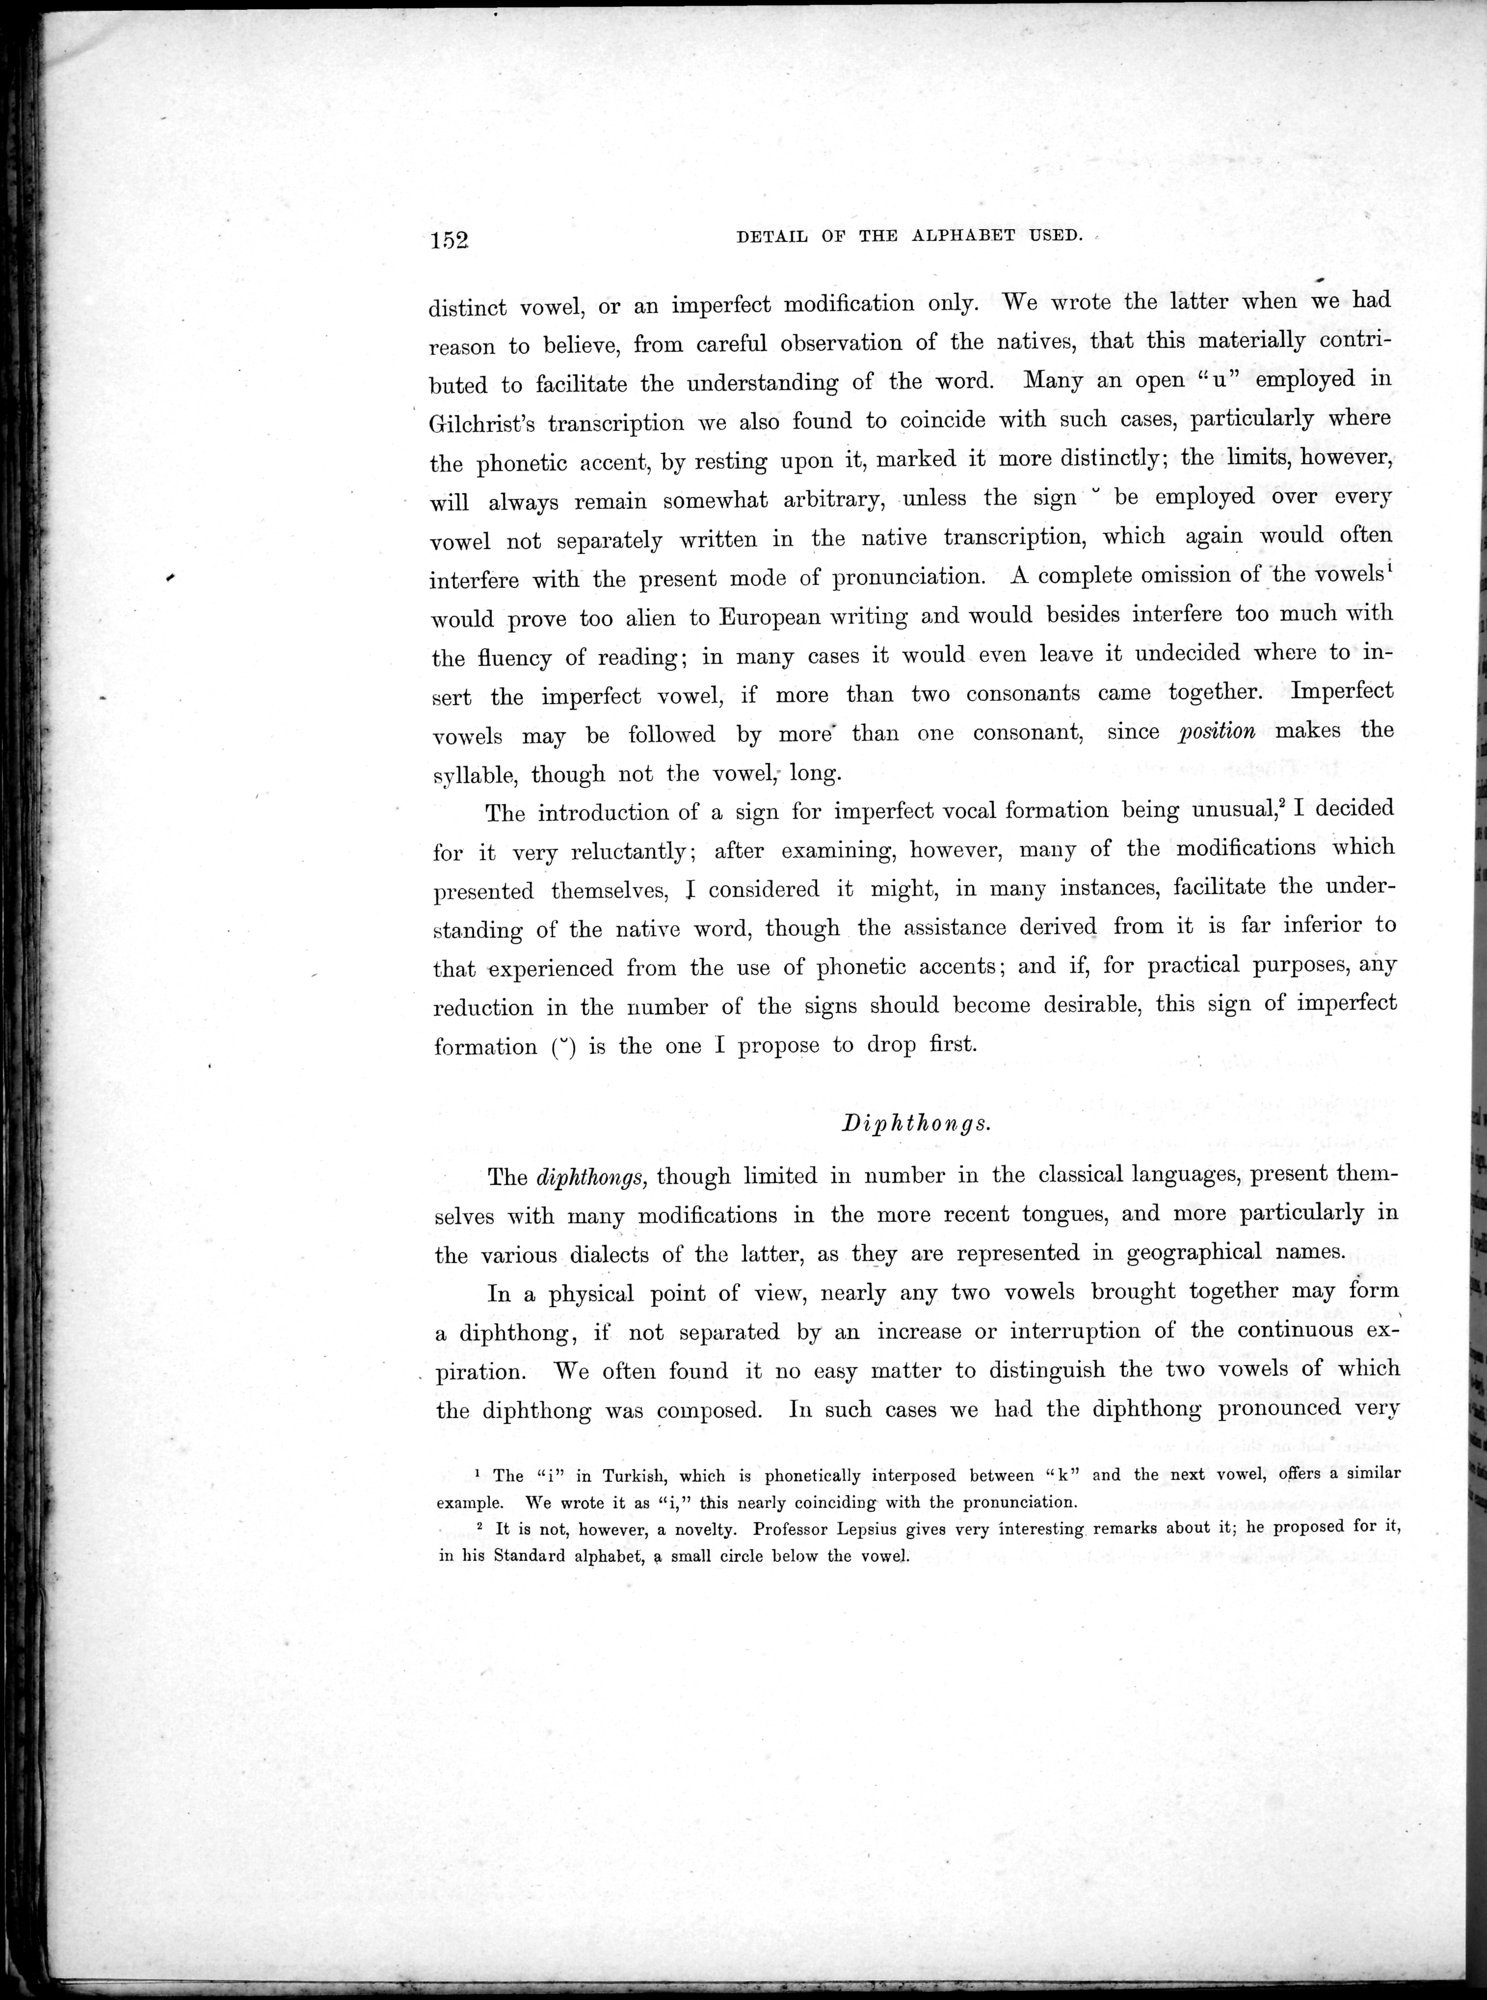 Results of a Scientific Mission to India and High Asia : vol.3 / Page 184 (Grayscale High Resolution Image)